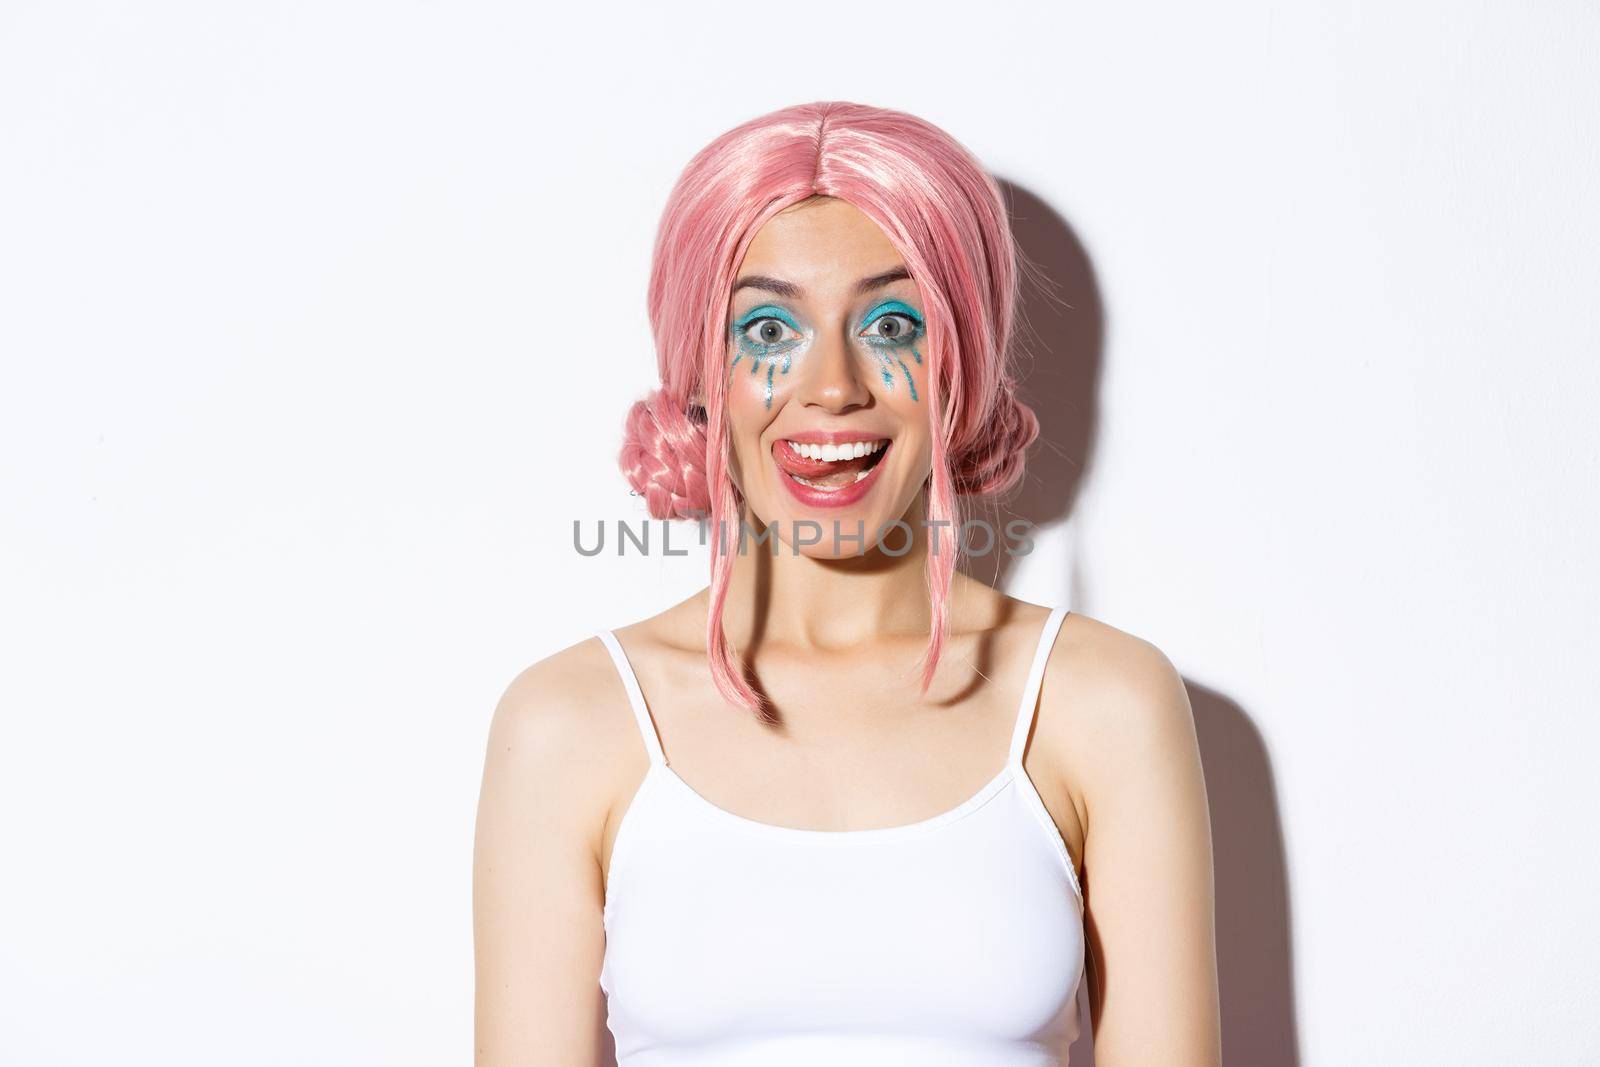 Close-up of attractive happy girl showing tongue and smiling, wearing pink party wig and bright makeup, standing over white background.